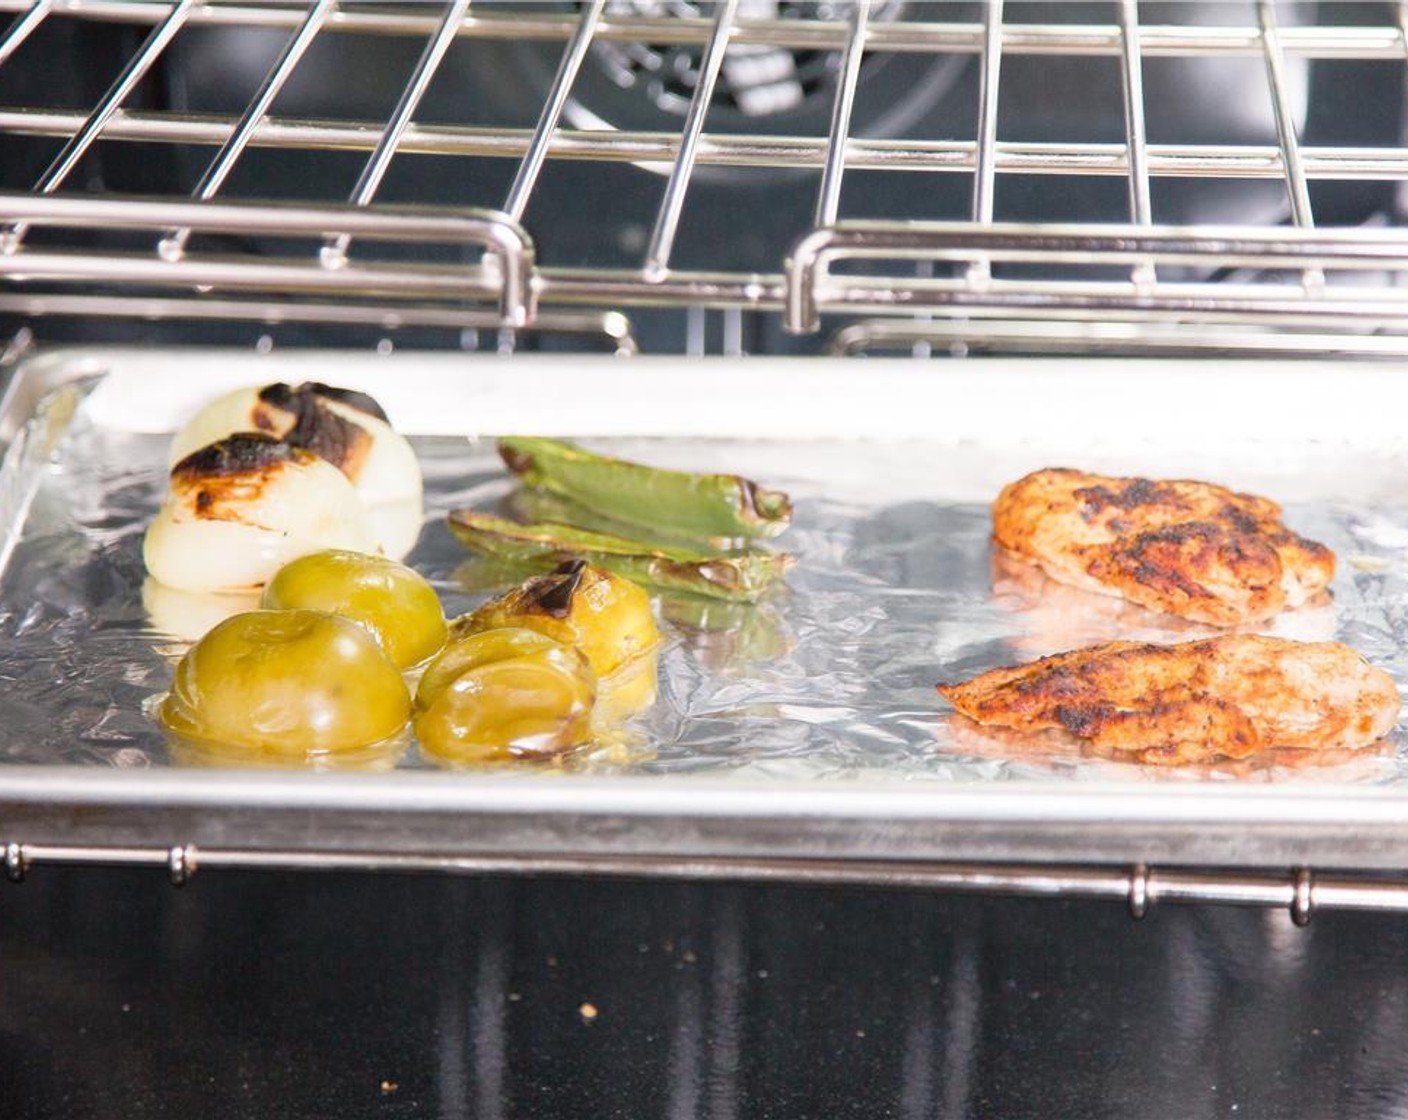 step 10 Place the chicken breasts side by side on the opposite side of the sheet pan from the tomatillos, jalapeno, and onion. Place the sheet pan under the broiler and allow to cook for nine minutes until the chicken is cooked through and the jalapeno and tomatillo are charred.